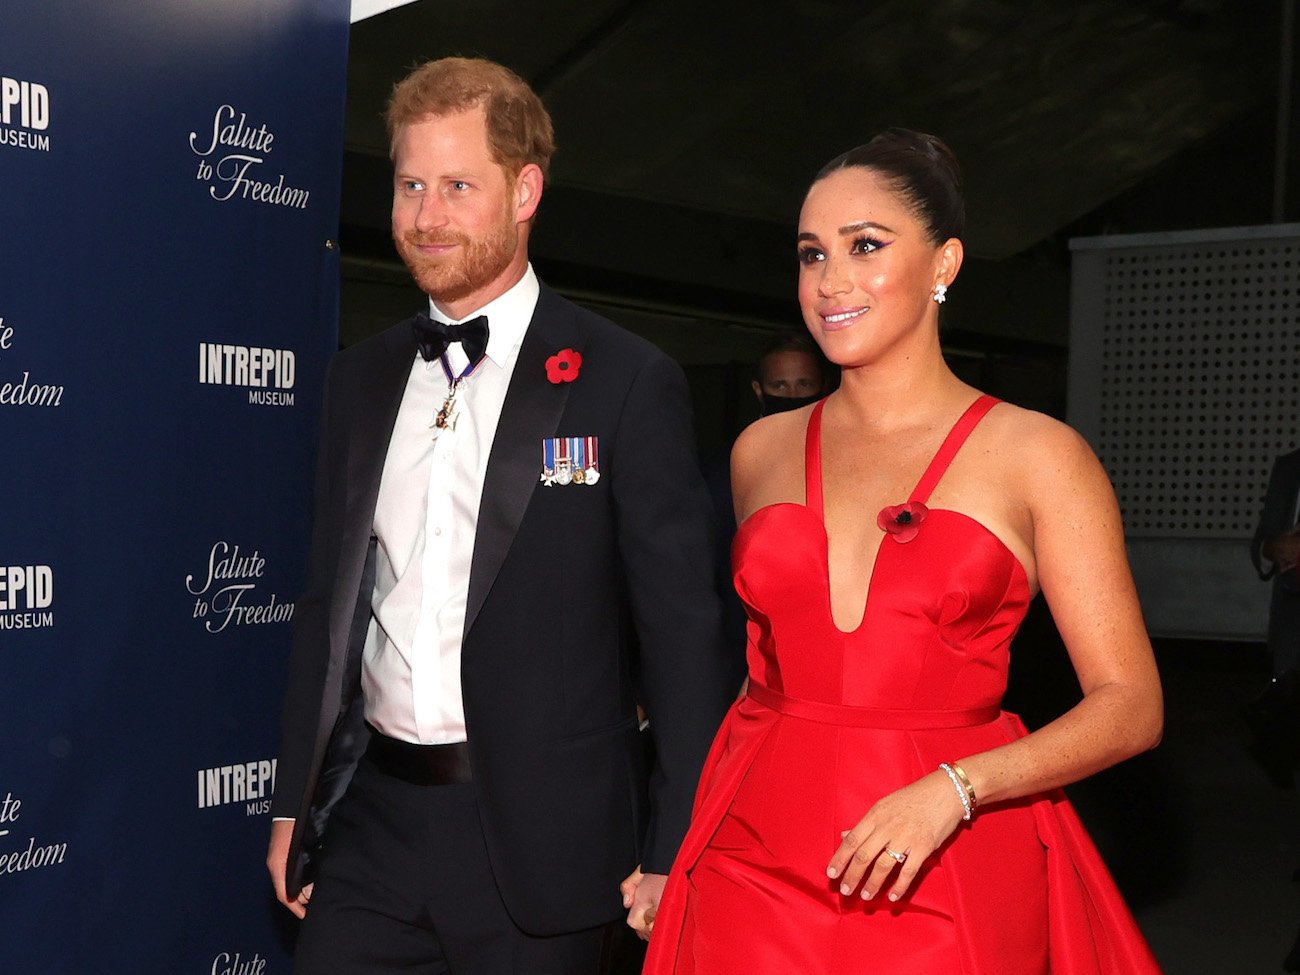 Prince Harry wears a tuxedo as he stands next to Meghan Markle in a red gown